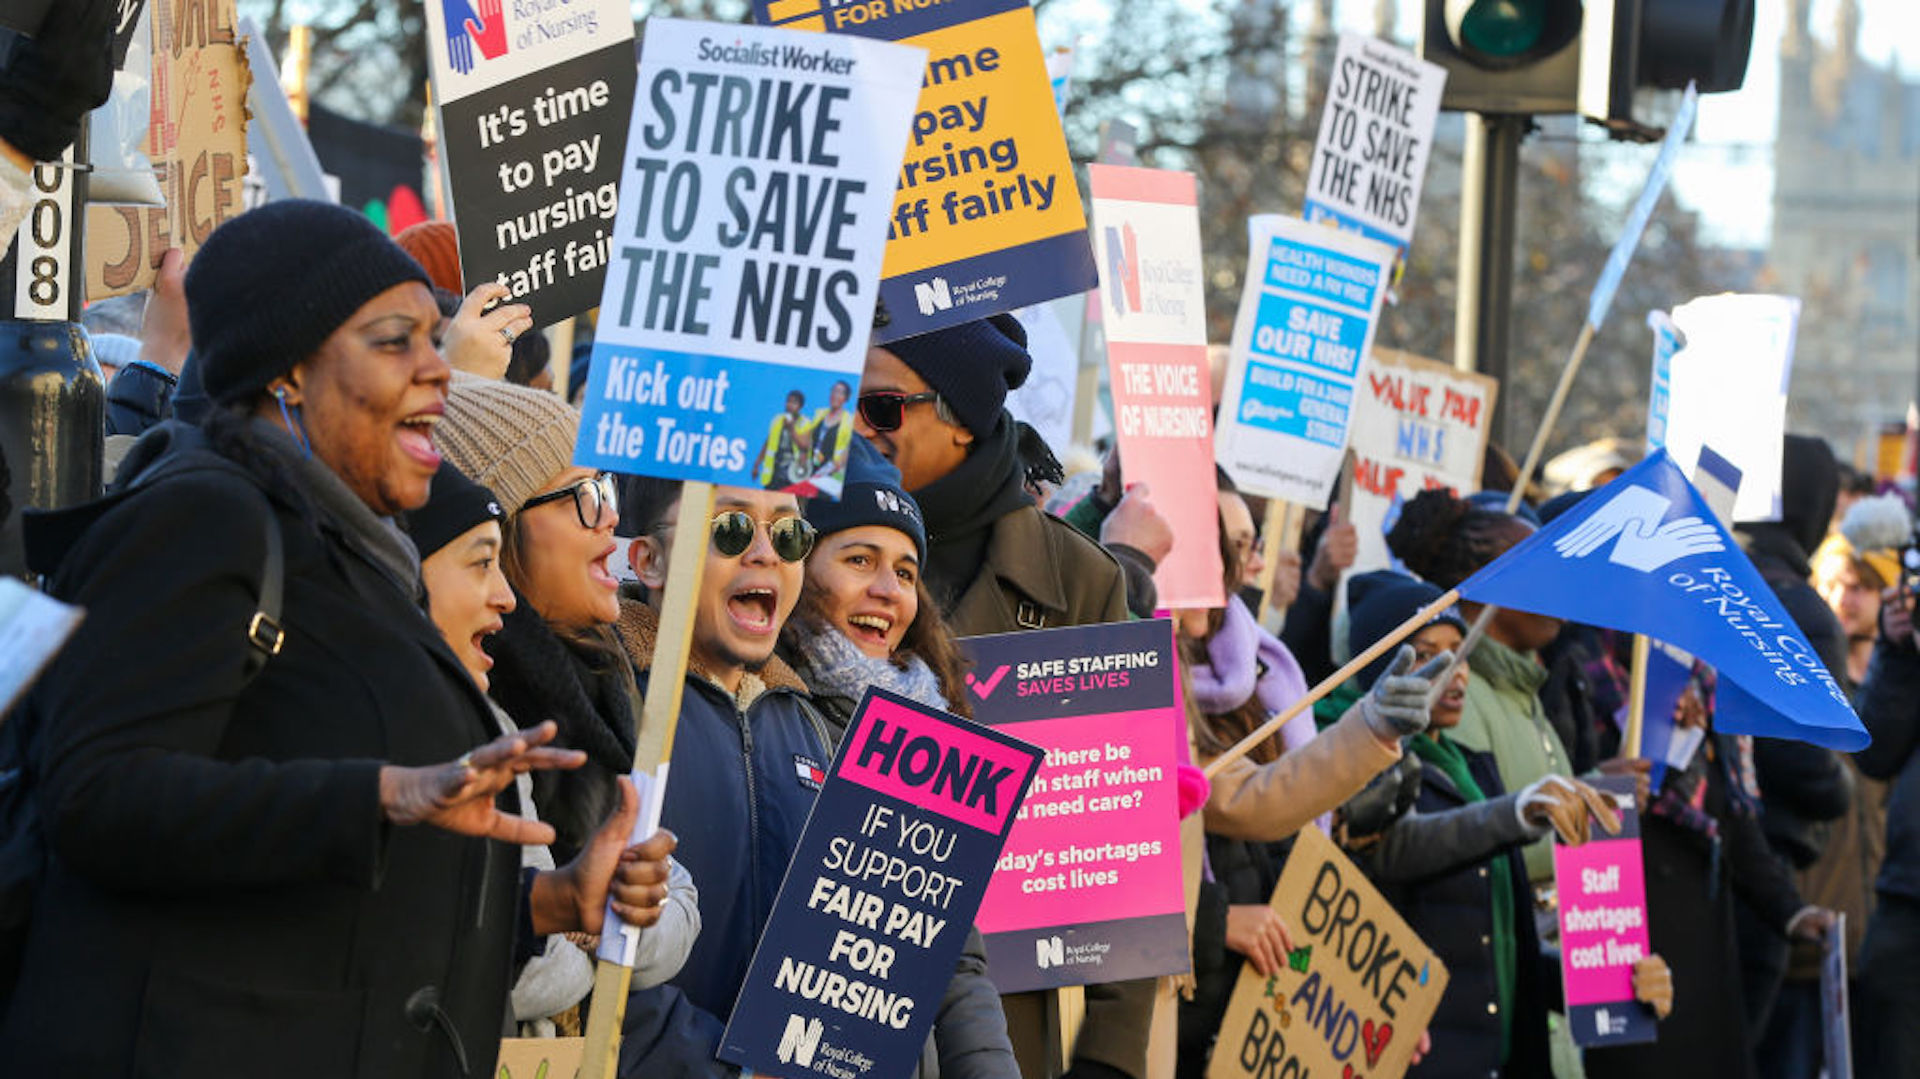 NHS nurses hold placards expressing their opinion during a protest outside St. Thomas' Hospital in central London on day one of the two strikes taking place this month.